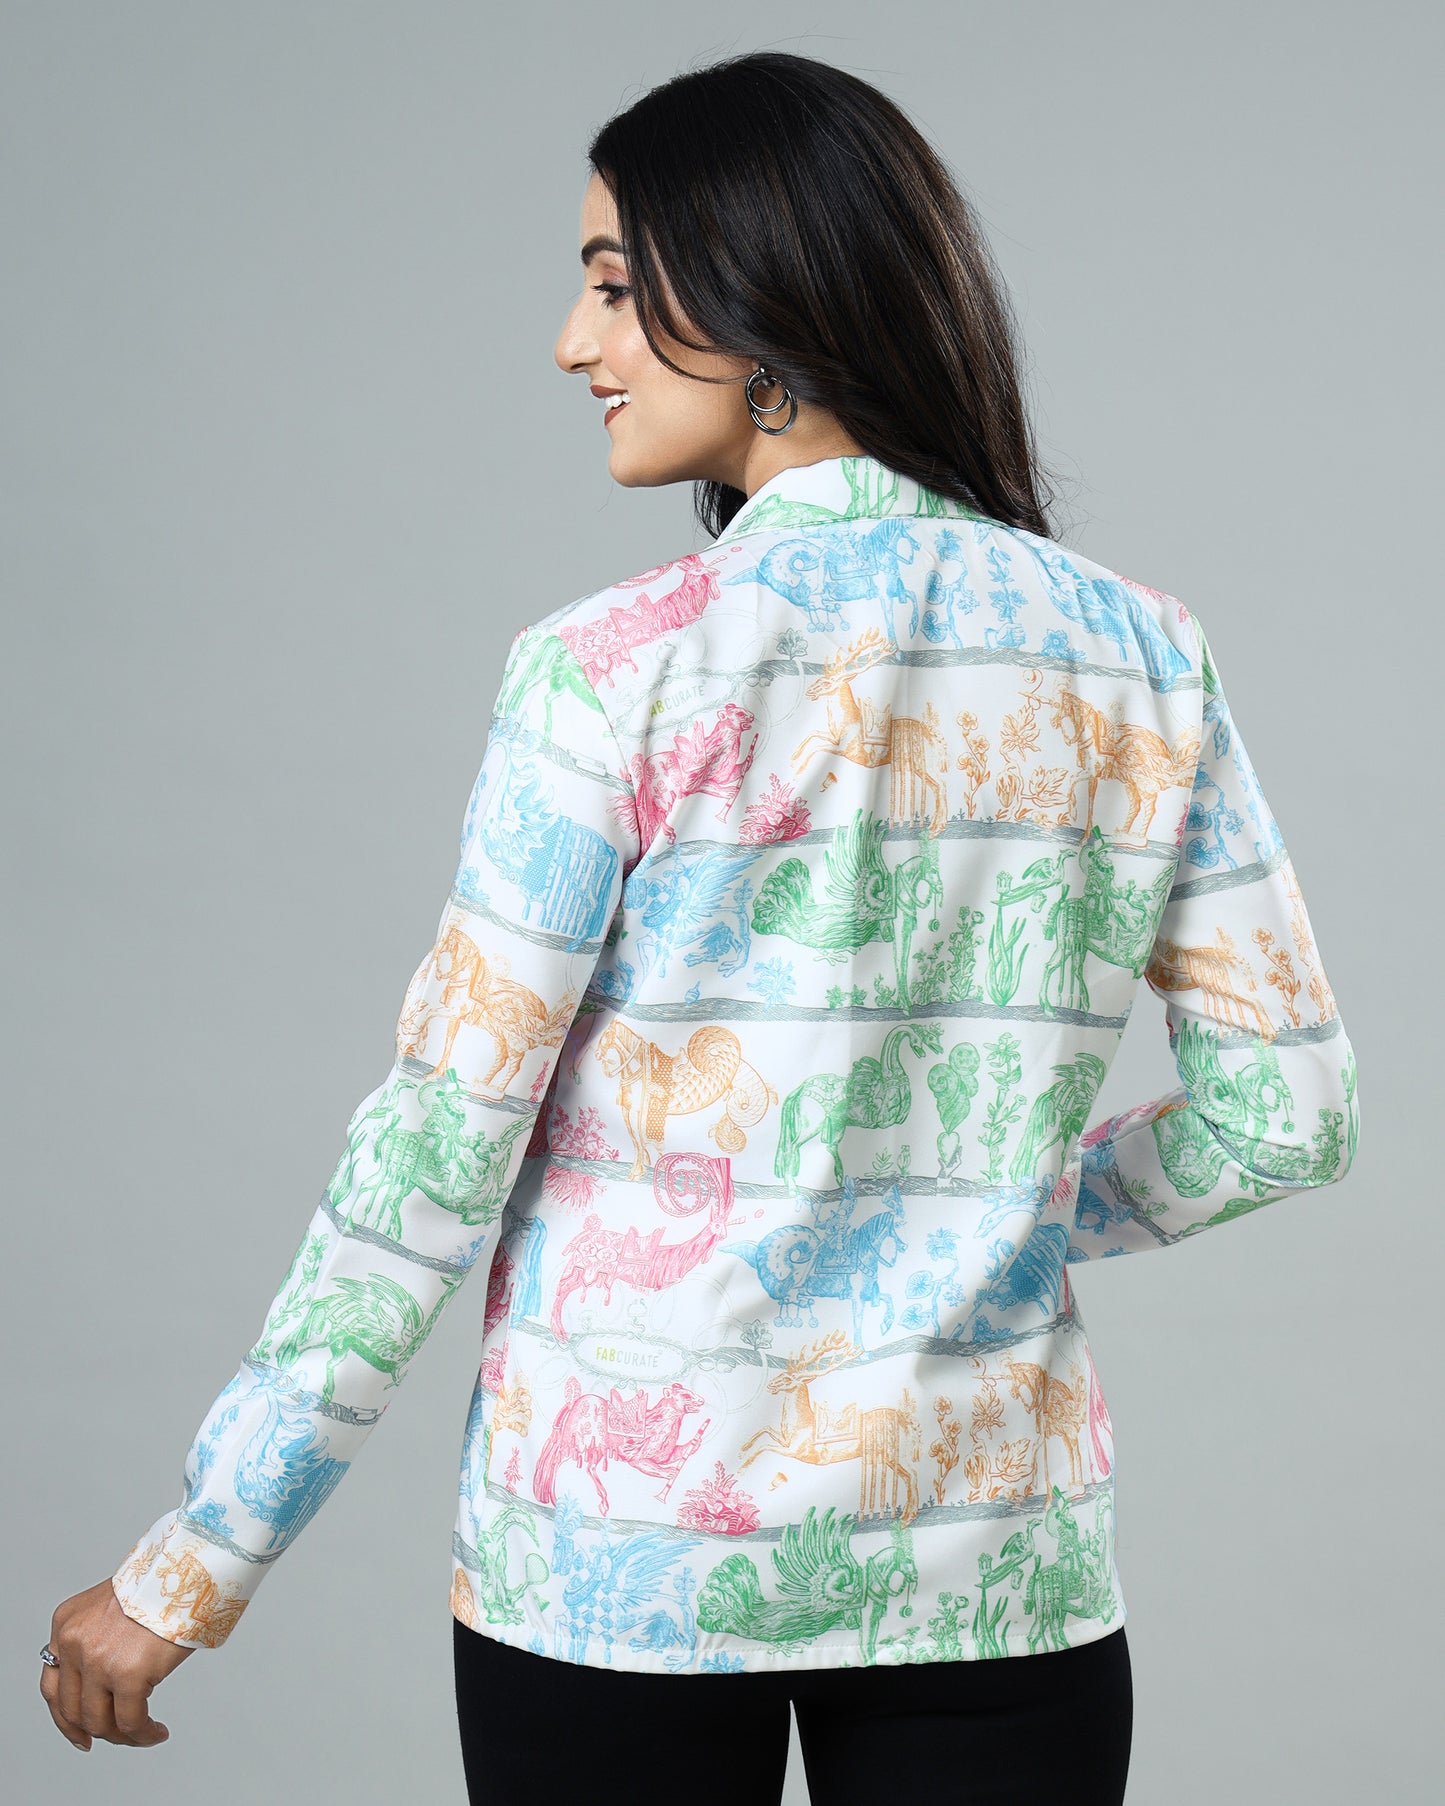 Introducing The Fabcurate's Icon Women'S Jacket